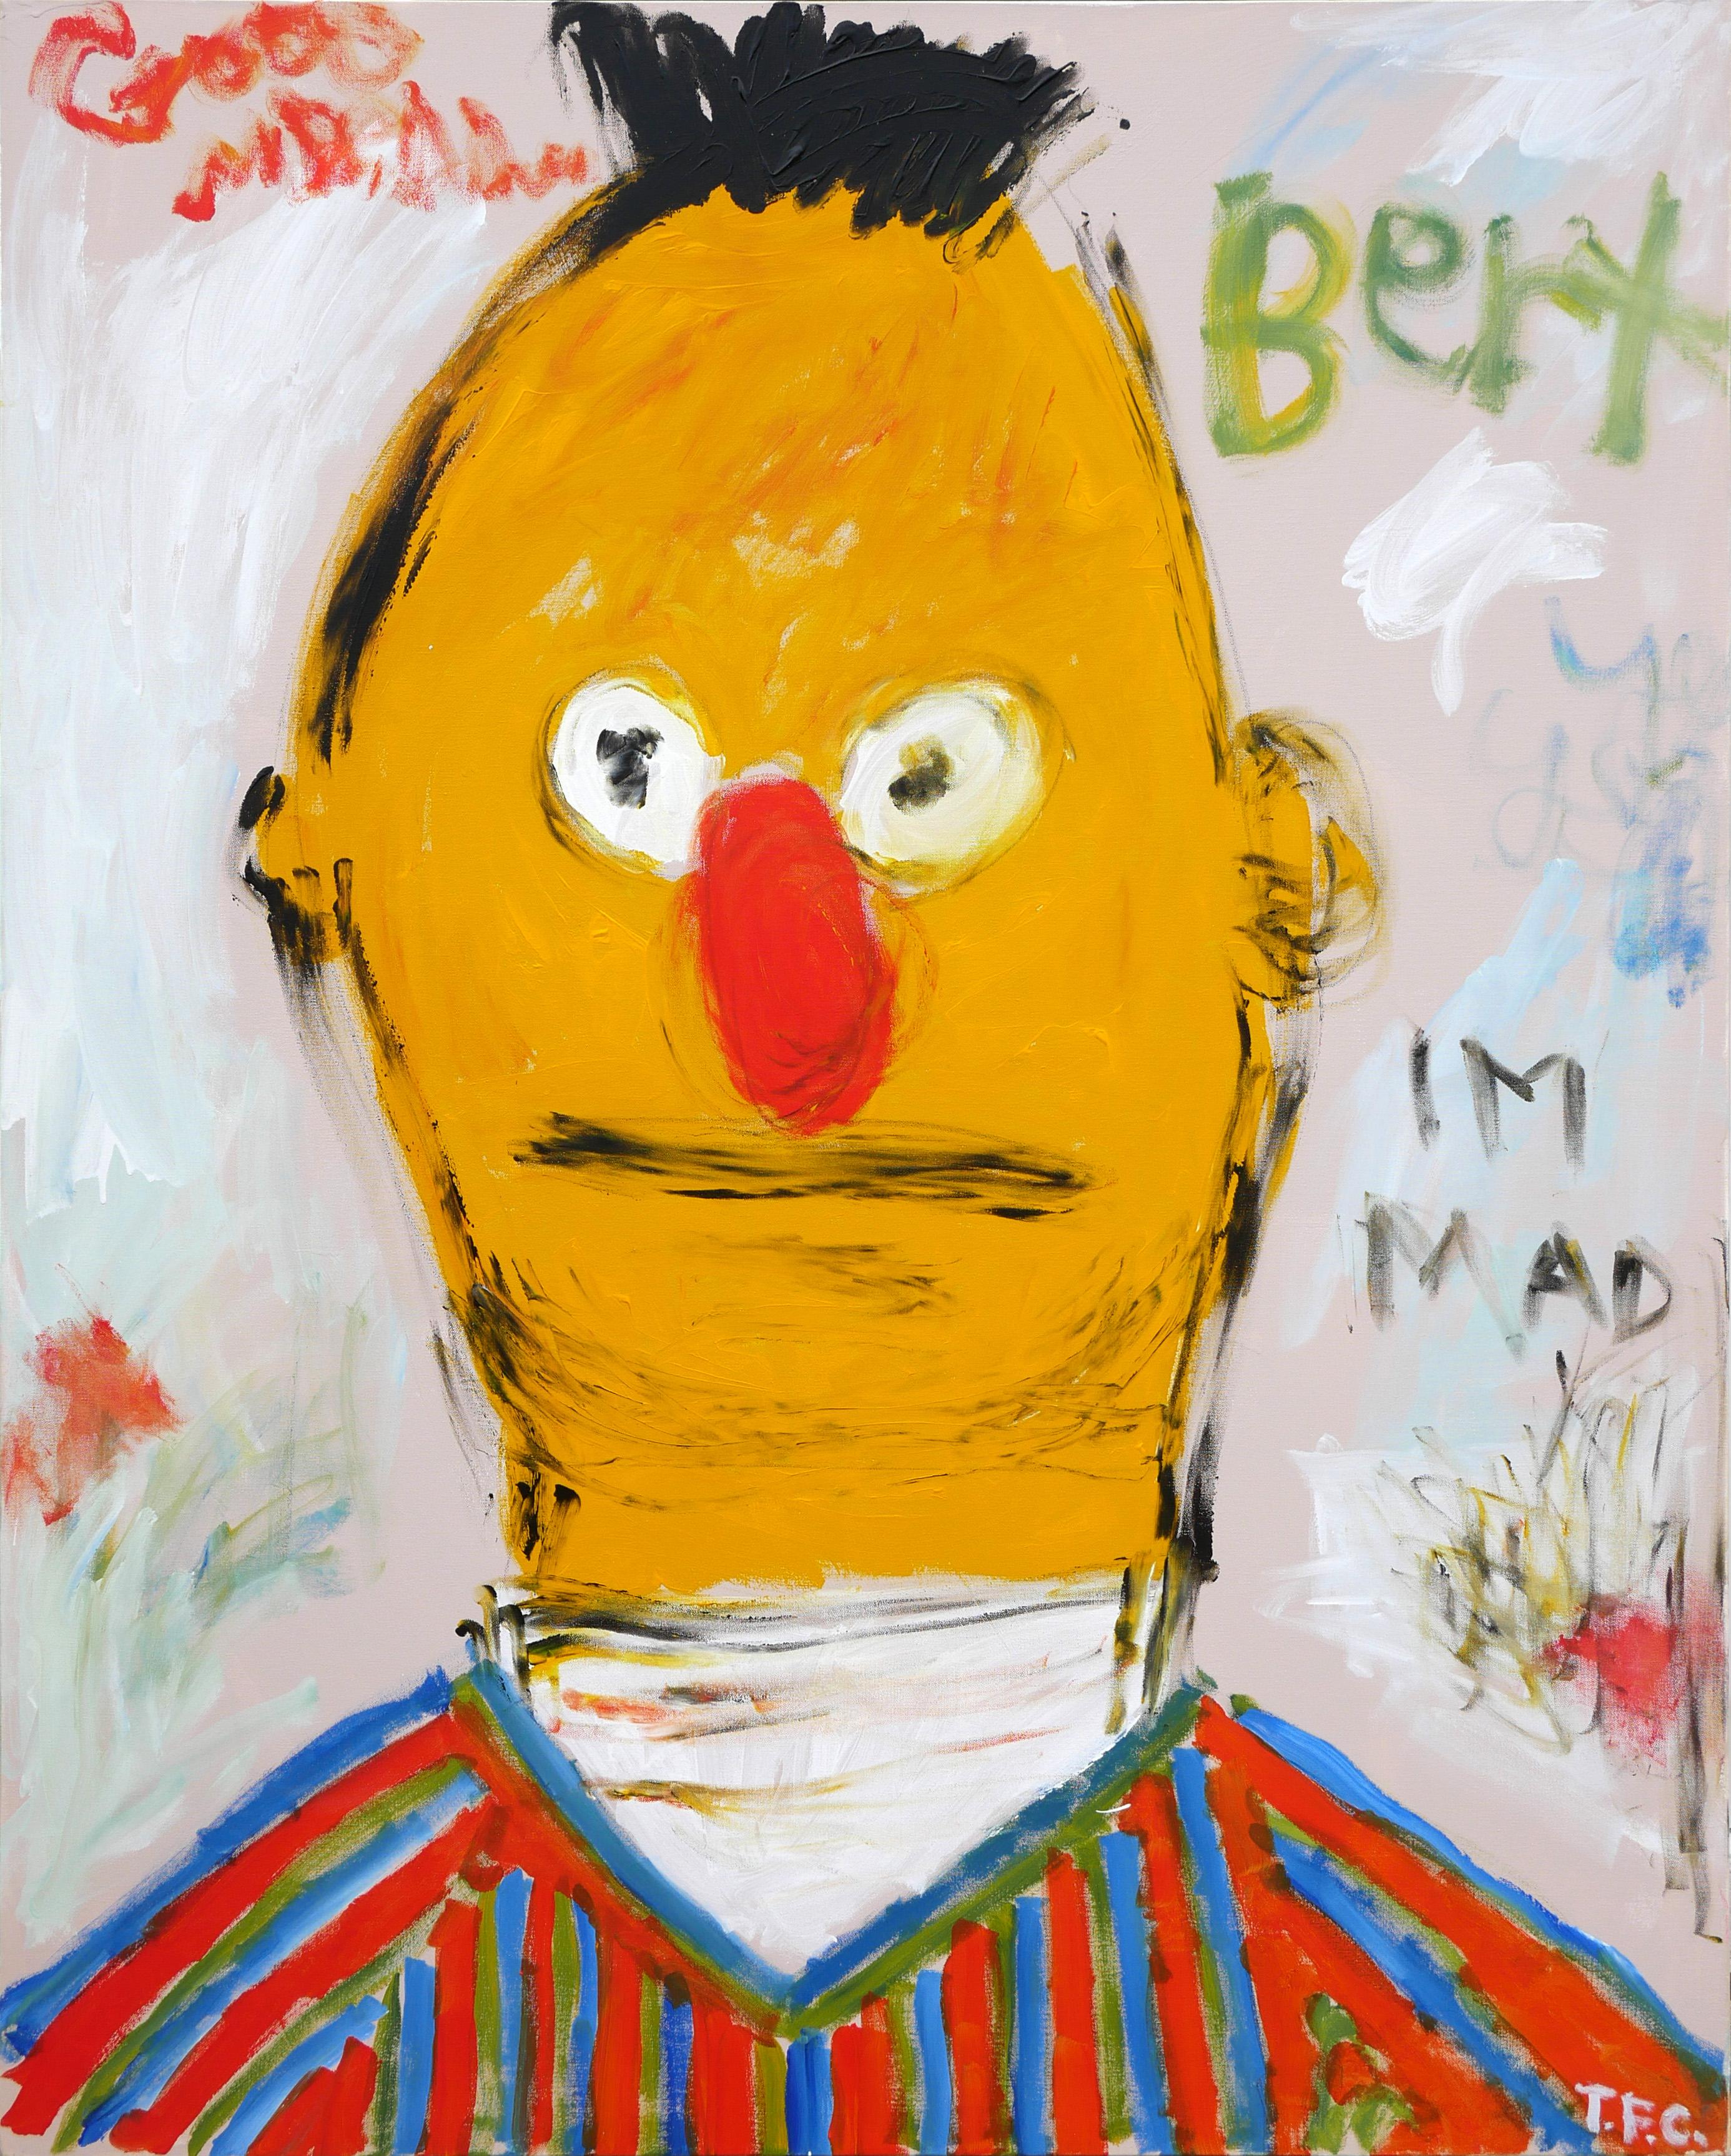 Tyler Casey Figurative Painting - "Bert" Contemporary Abstract Pop Art Figure Painting of Sesame Street Character 